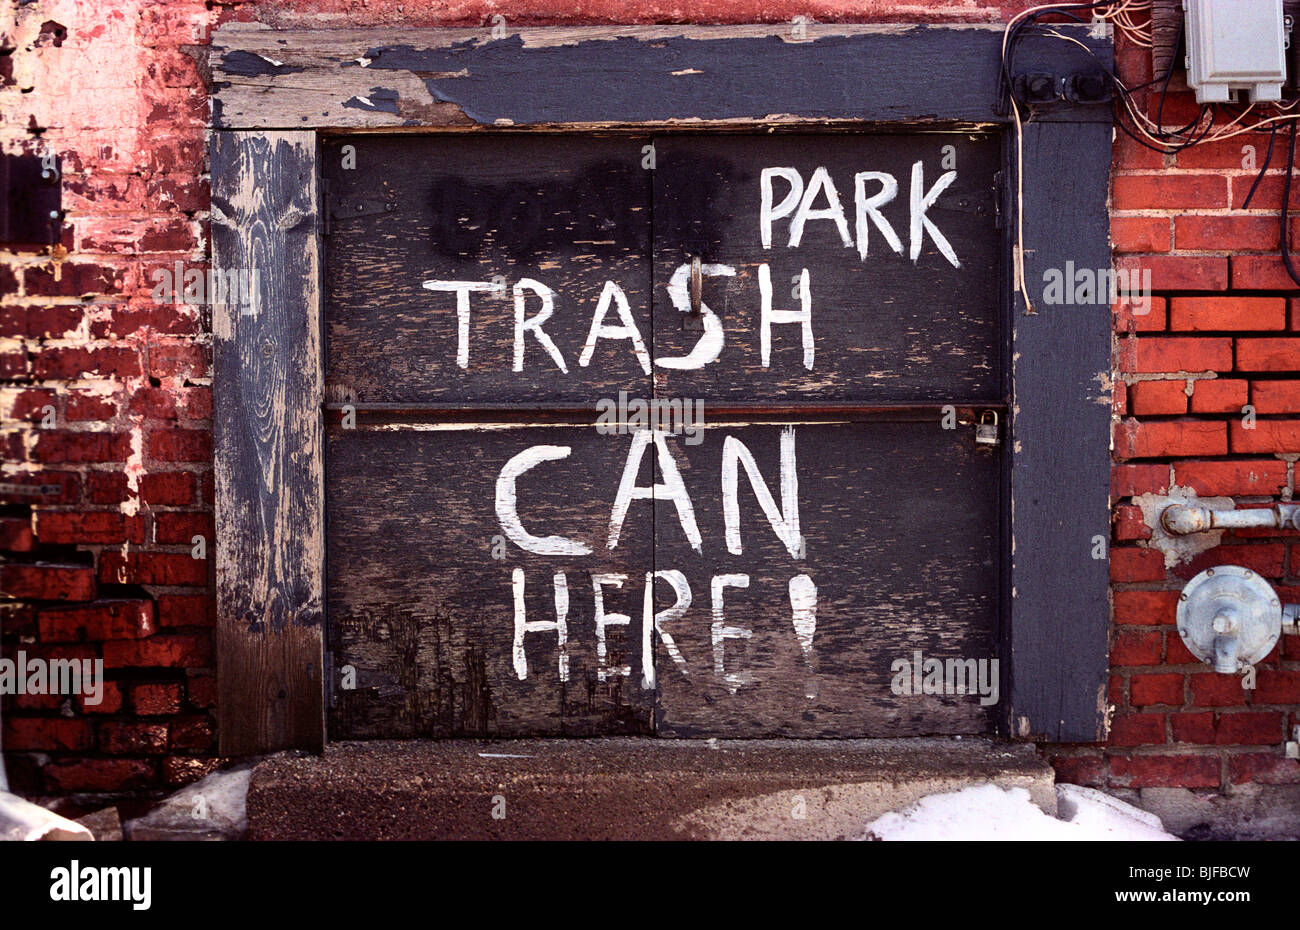 A rather odd 'PARK TRASH CAN HERE!' sign in an alleyway. Appears to have originally read 'DON'T PARK TRASH CAN HERE!' Stock Photo